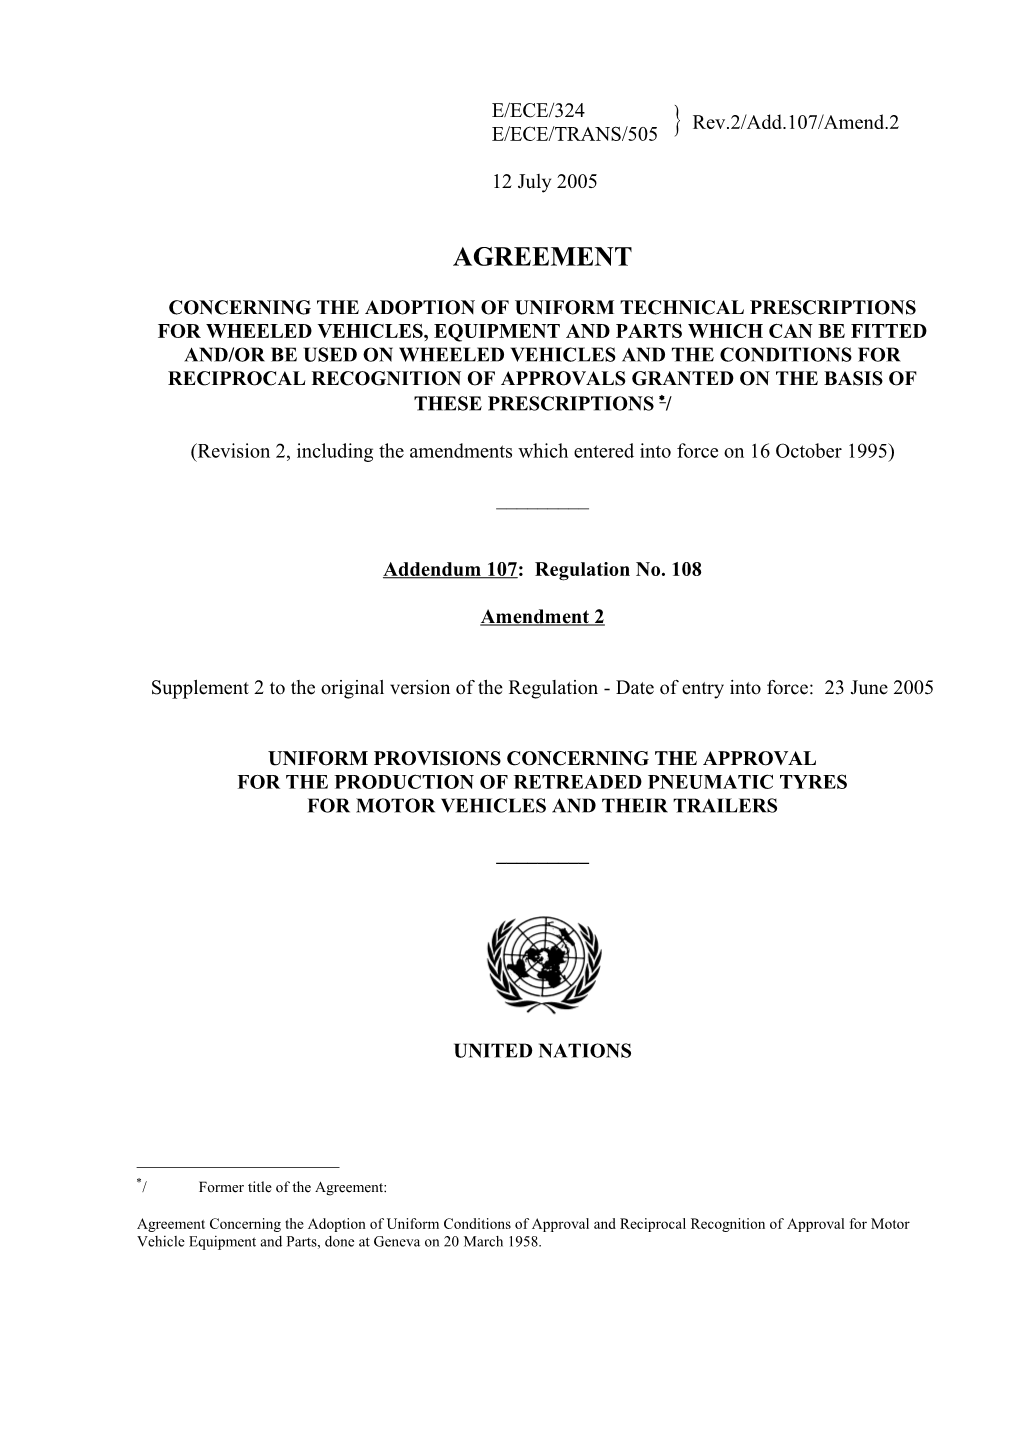 Revision 2, Including the Amendments Which Entered Into Force on 16 October 1995